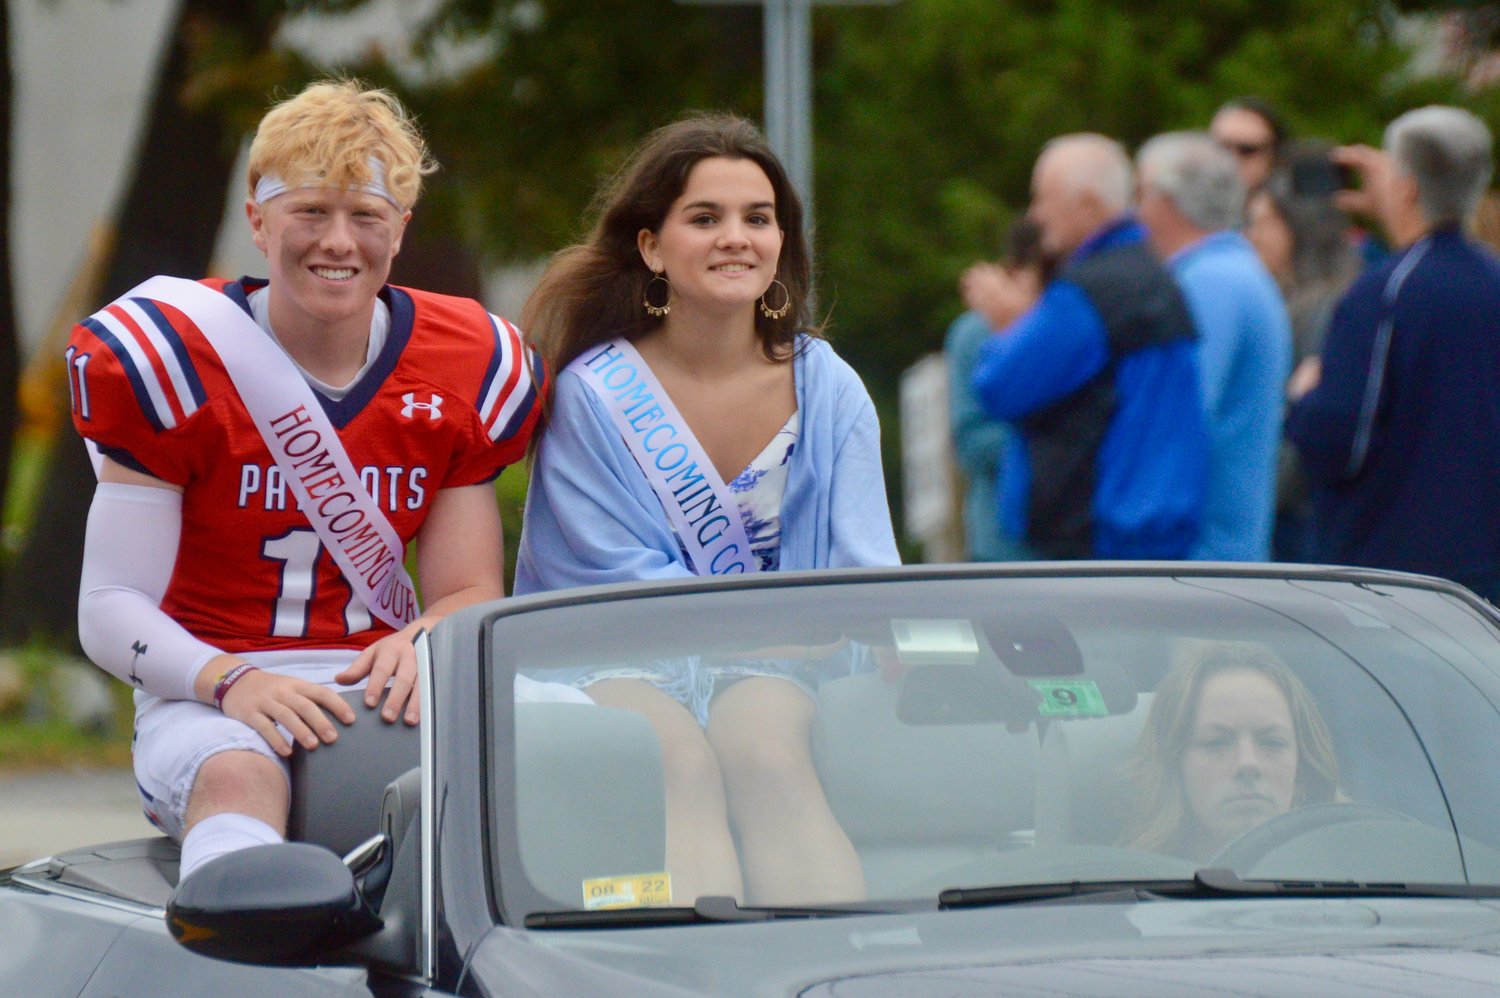 Gavin Bicho and Ruth McKinnon of the Homecoming court greet spectators along East Main Road during the parade.